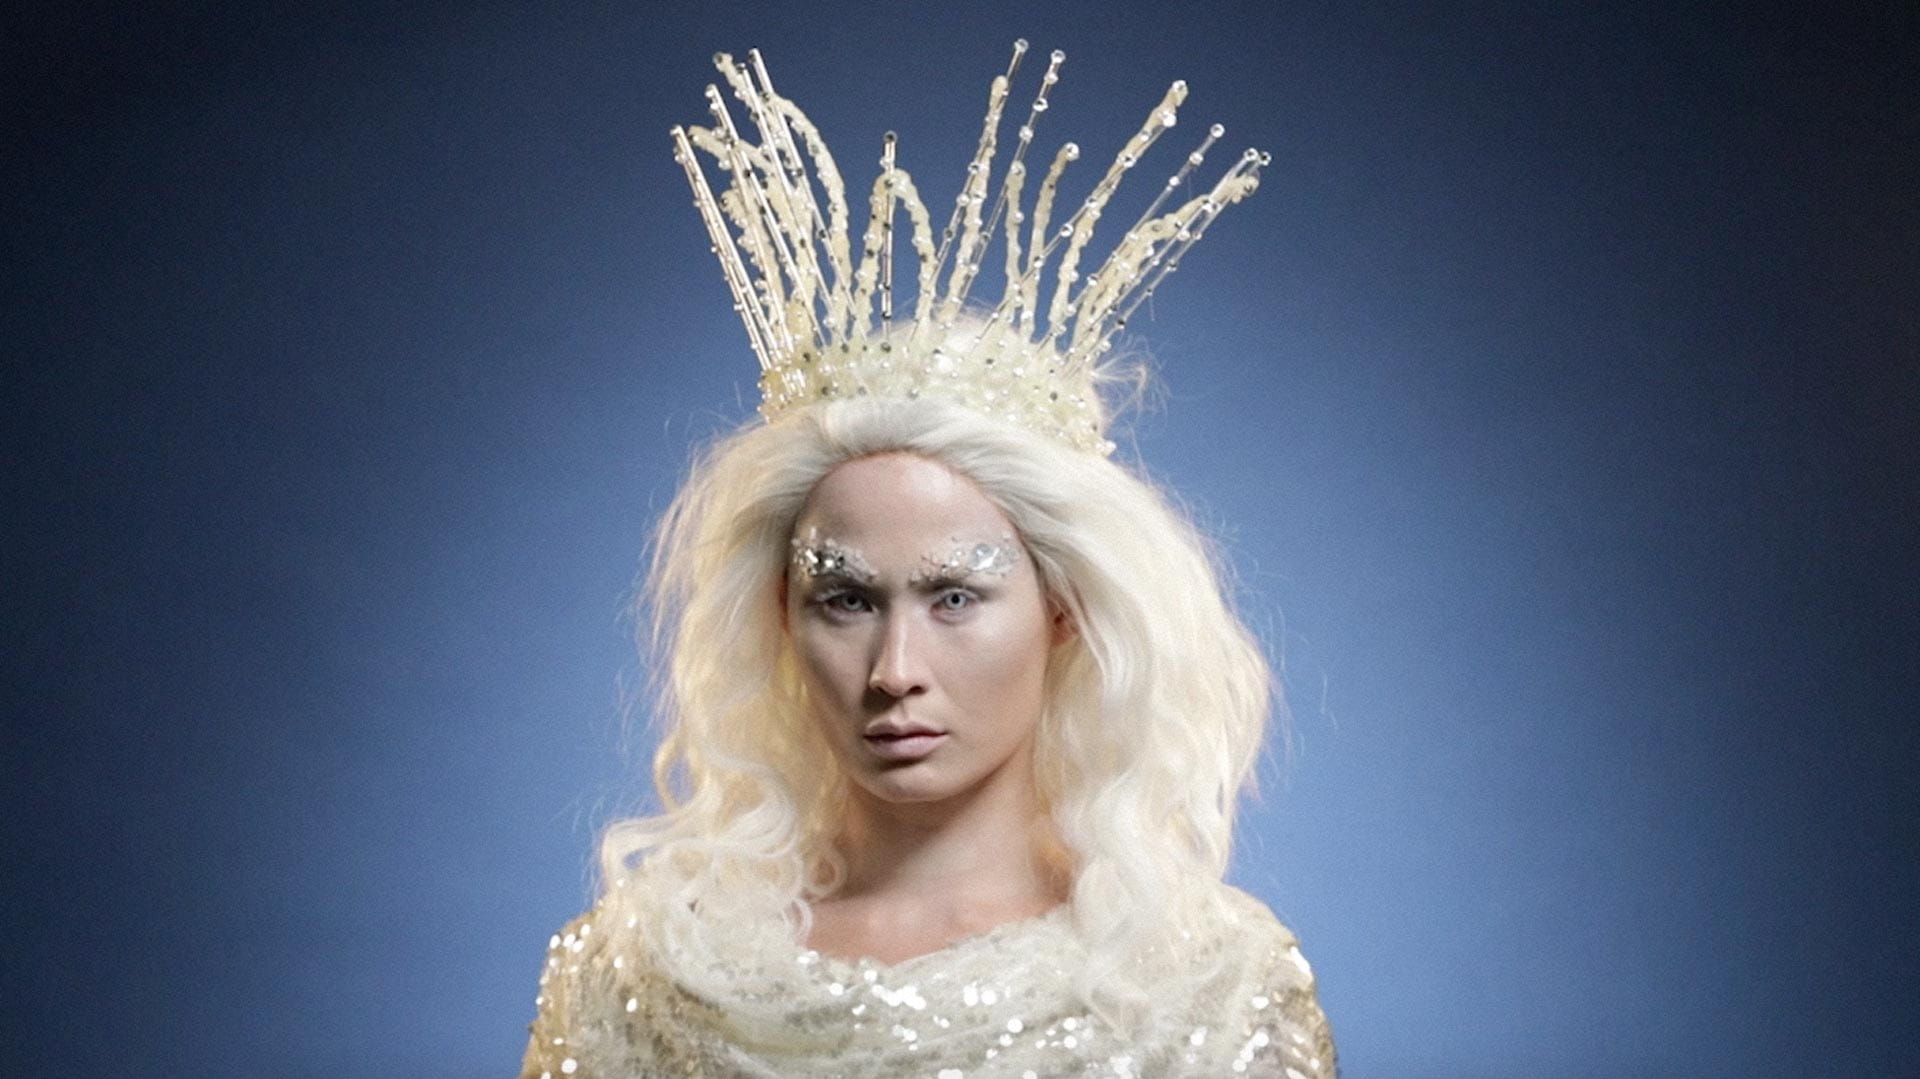 A model made up as Jadis the White Witch from the Chronicles of Narnia